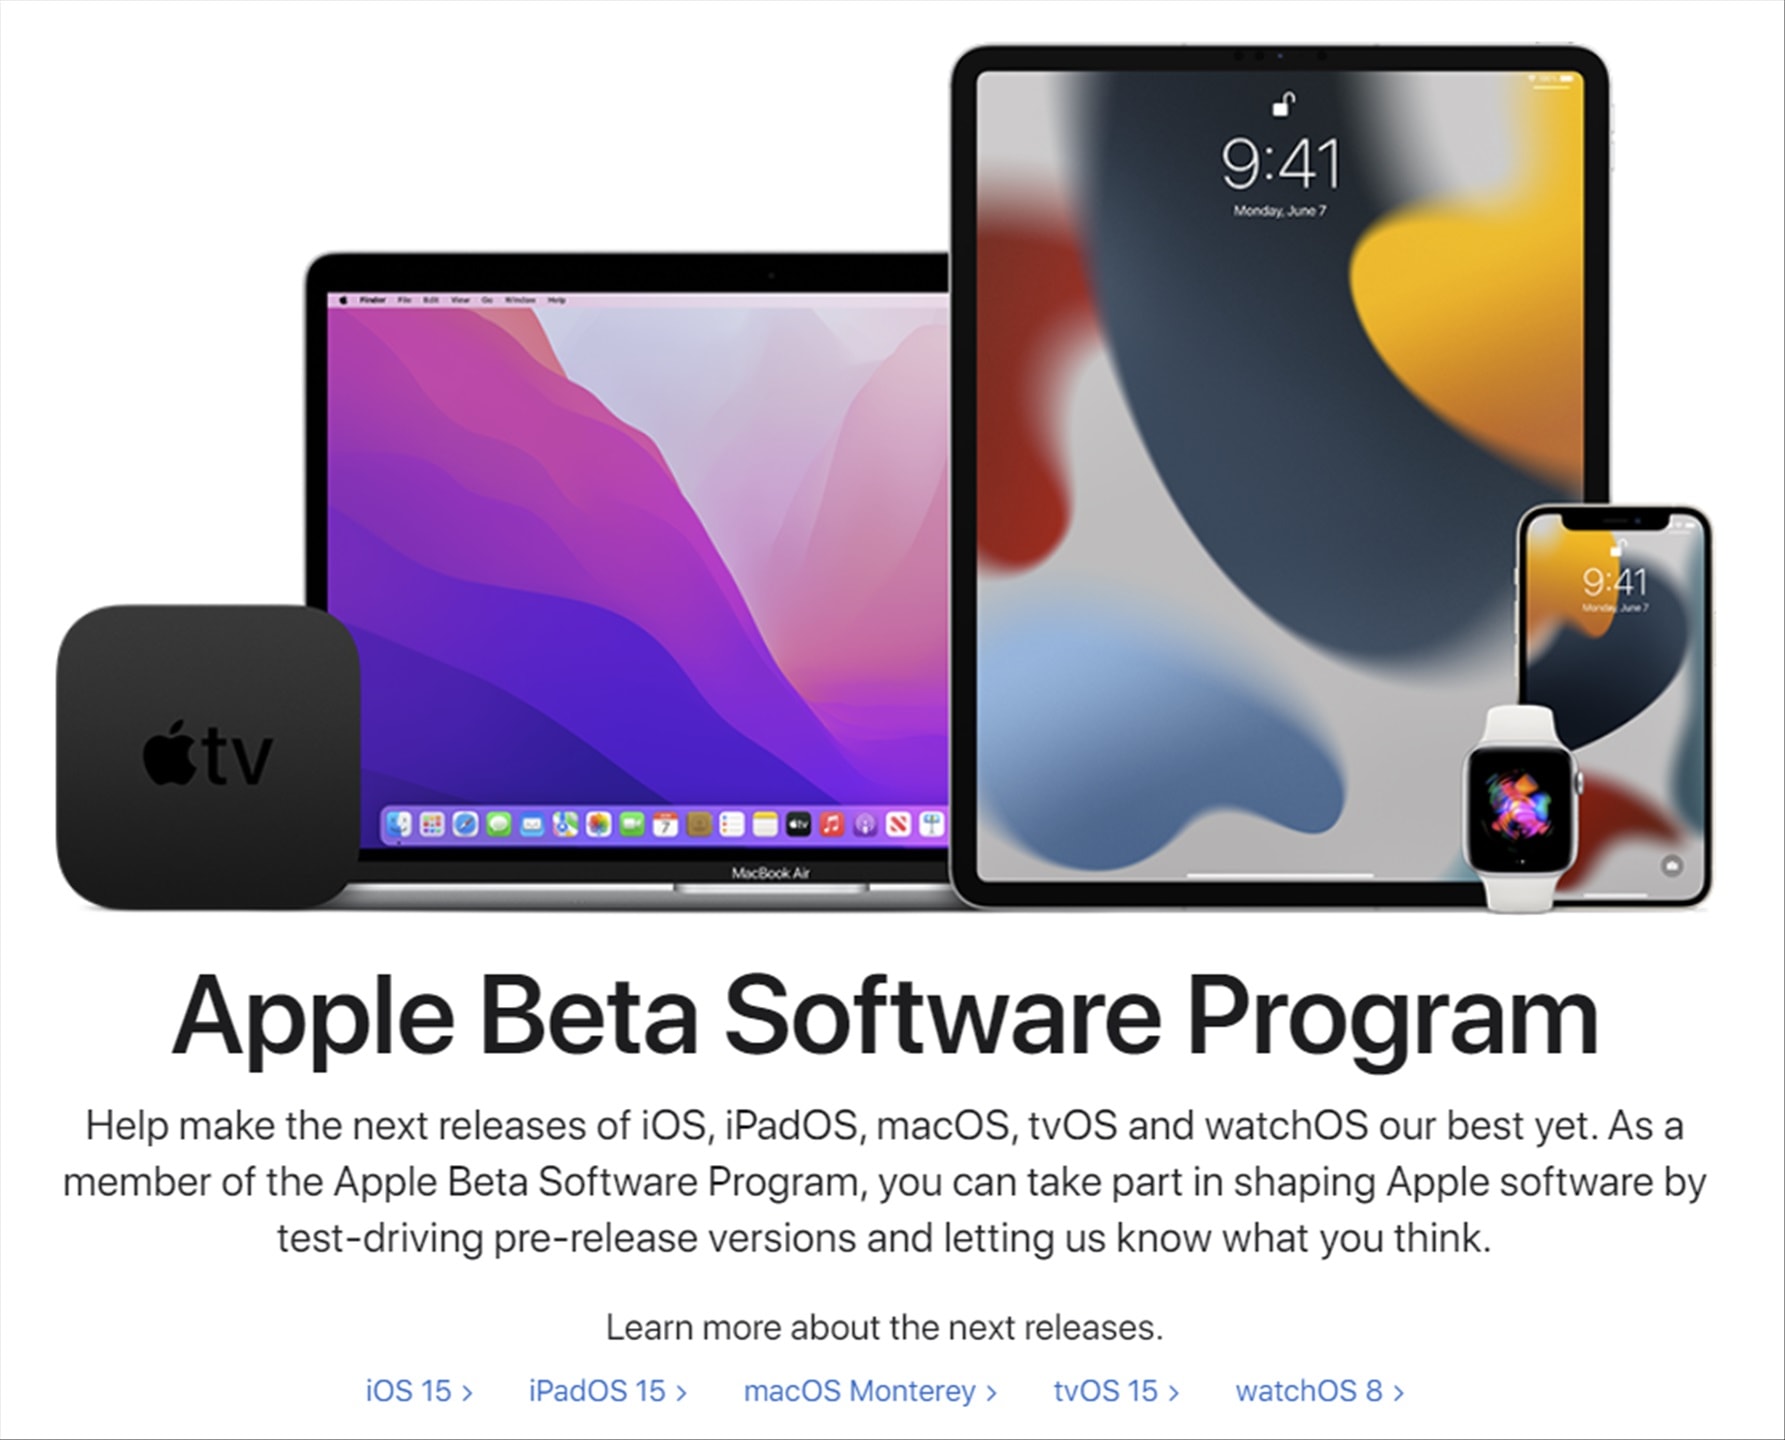 Apple iOS 15 Public Beta (and iPadOS 15 Public Beta) is out and you can download + install iOS 15 now